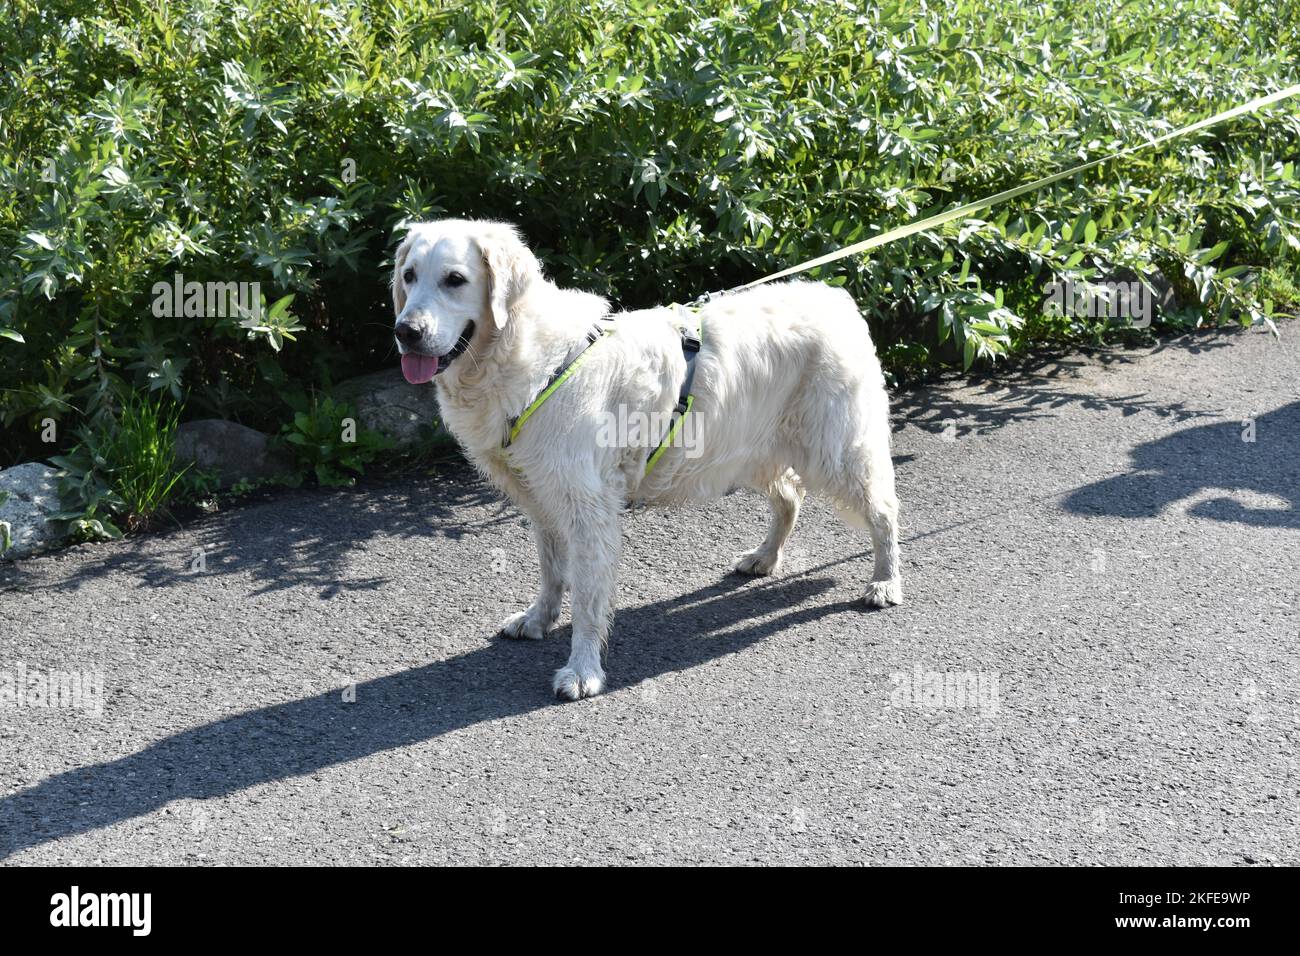 A fluffy Kuvazs white dog in a harness being walked on the street on a sunny day Stock Photo